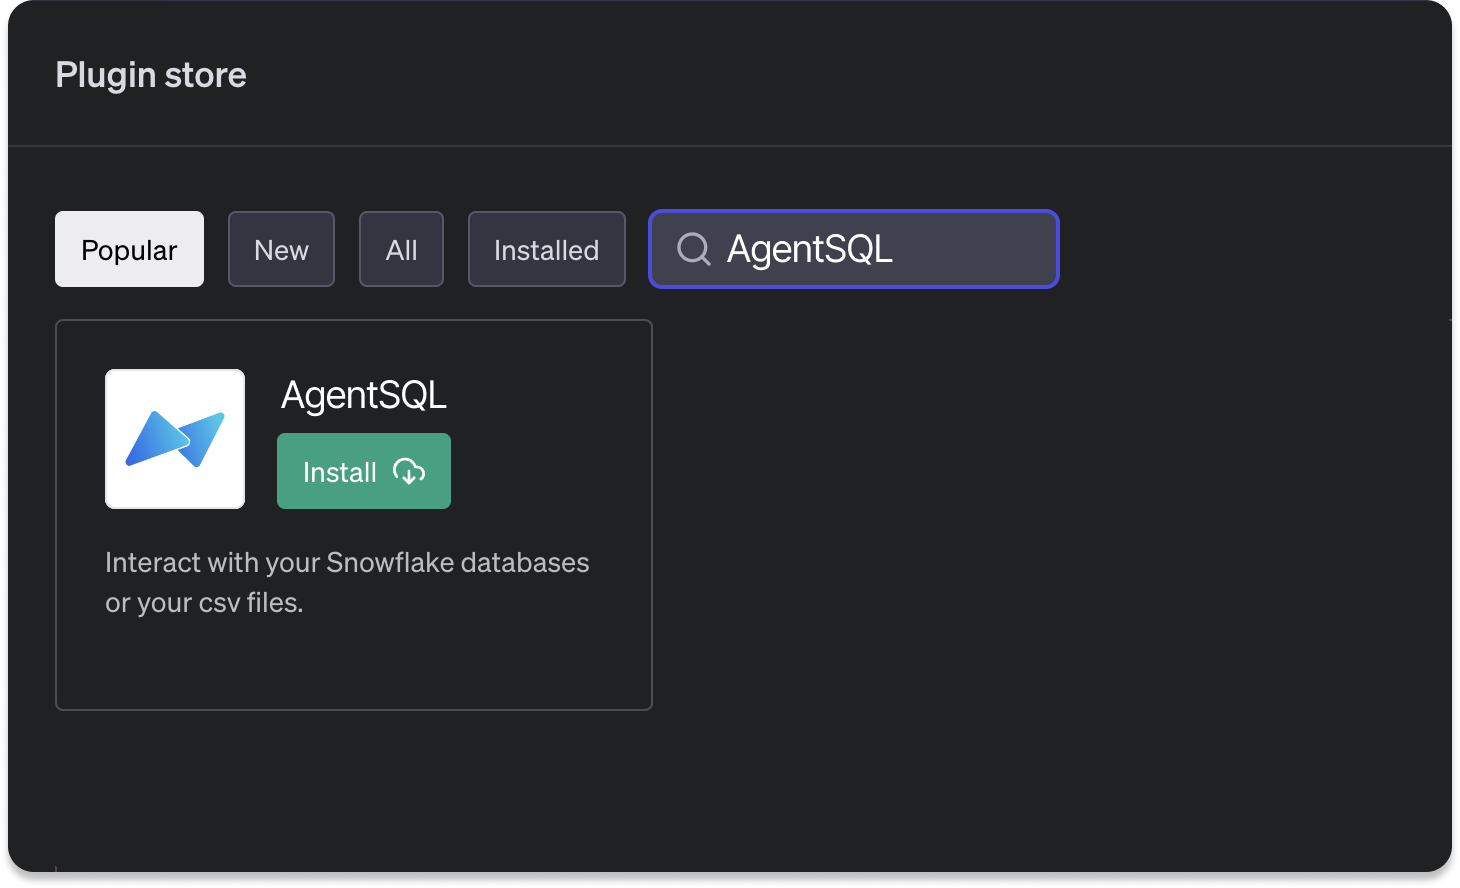 How to install AgentSQL